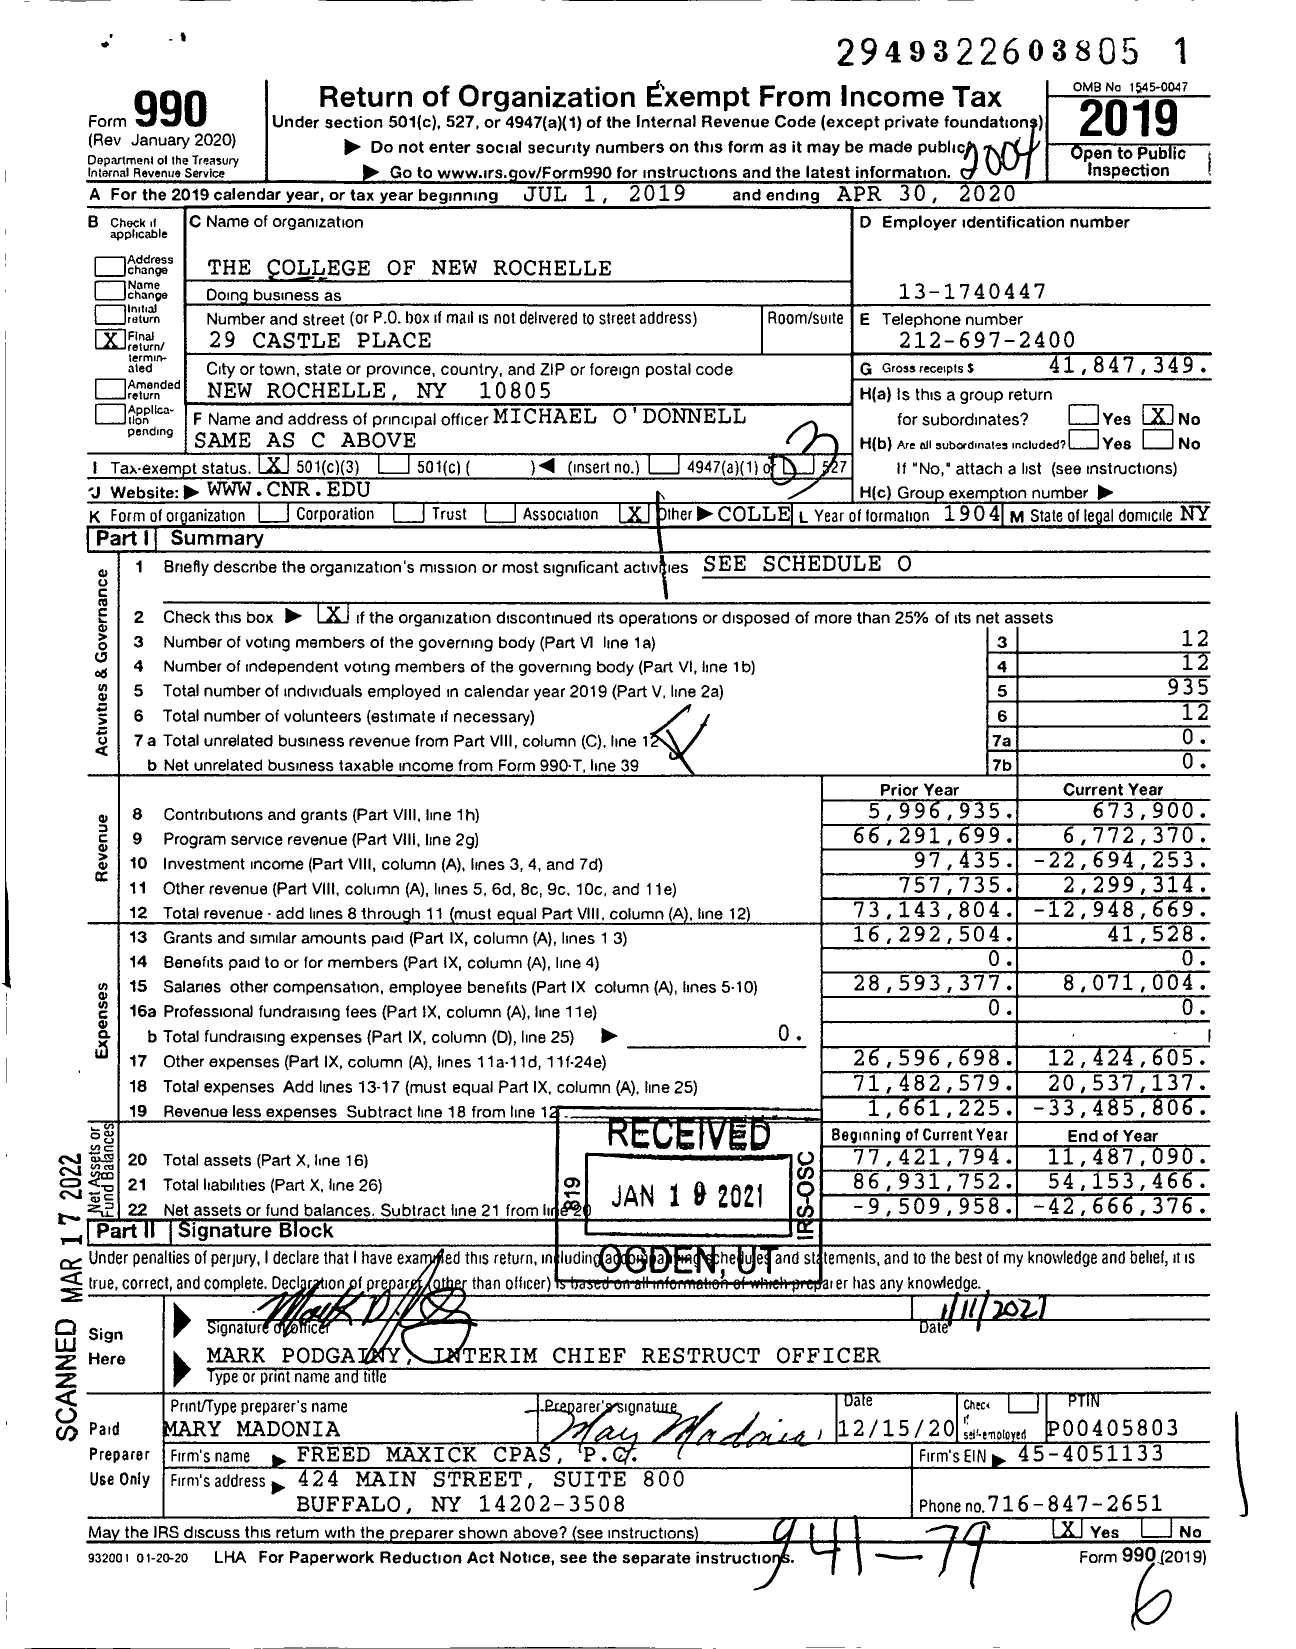 Image of first page of 2019 Form 990 for College of New Rochelle (CNR)